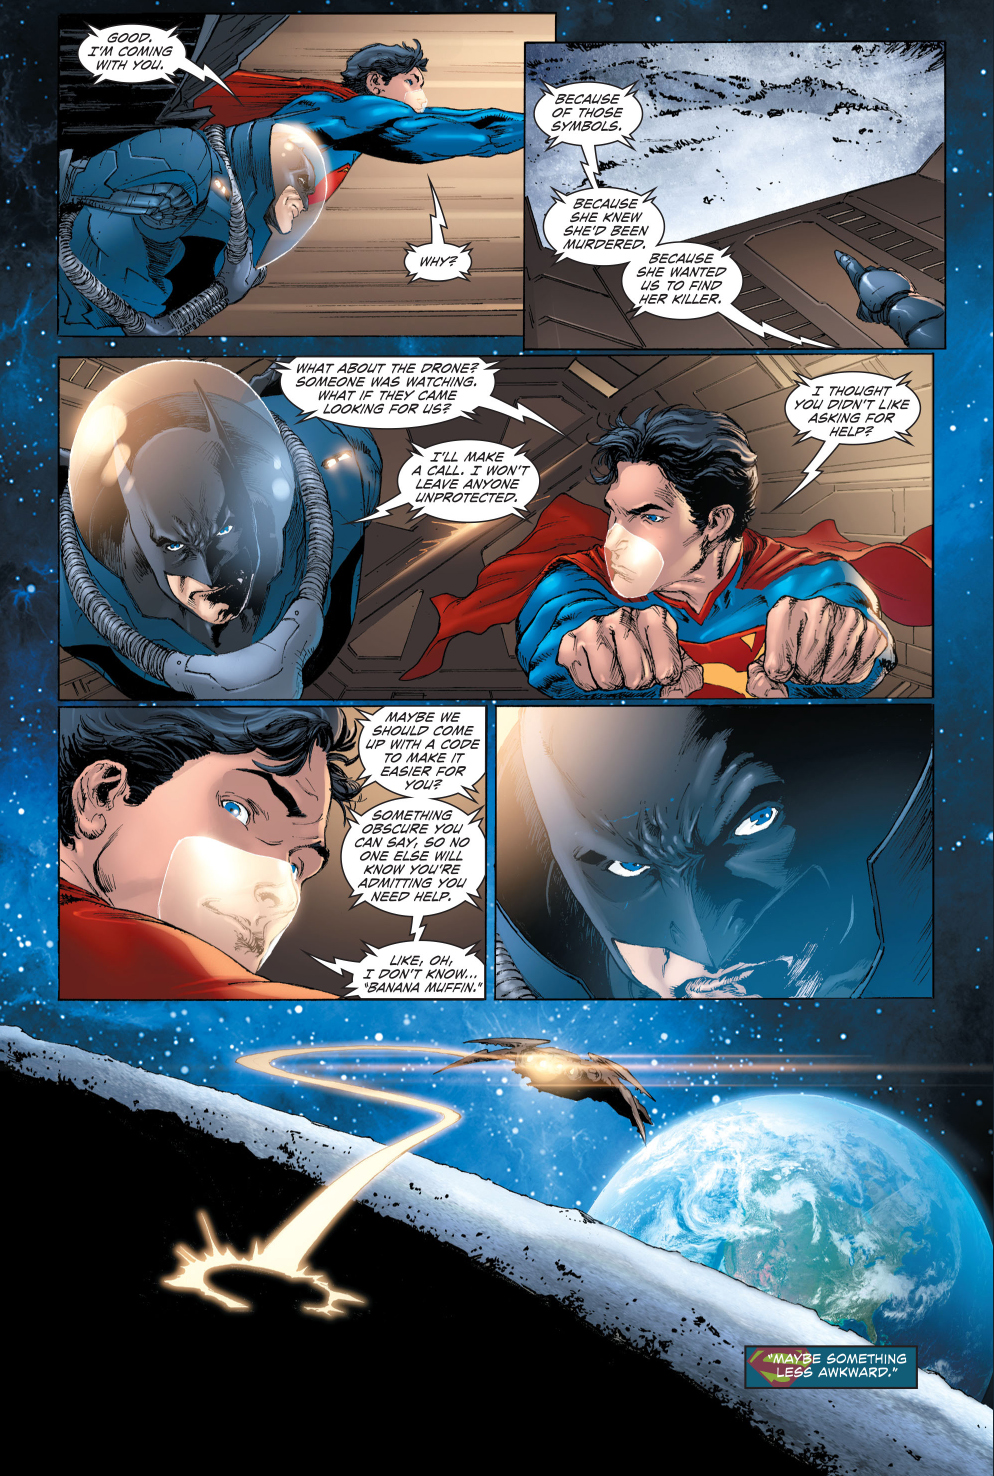 superman suggests a safe word for batman